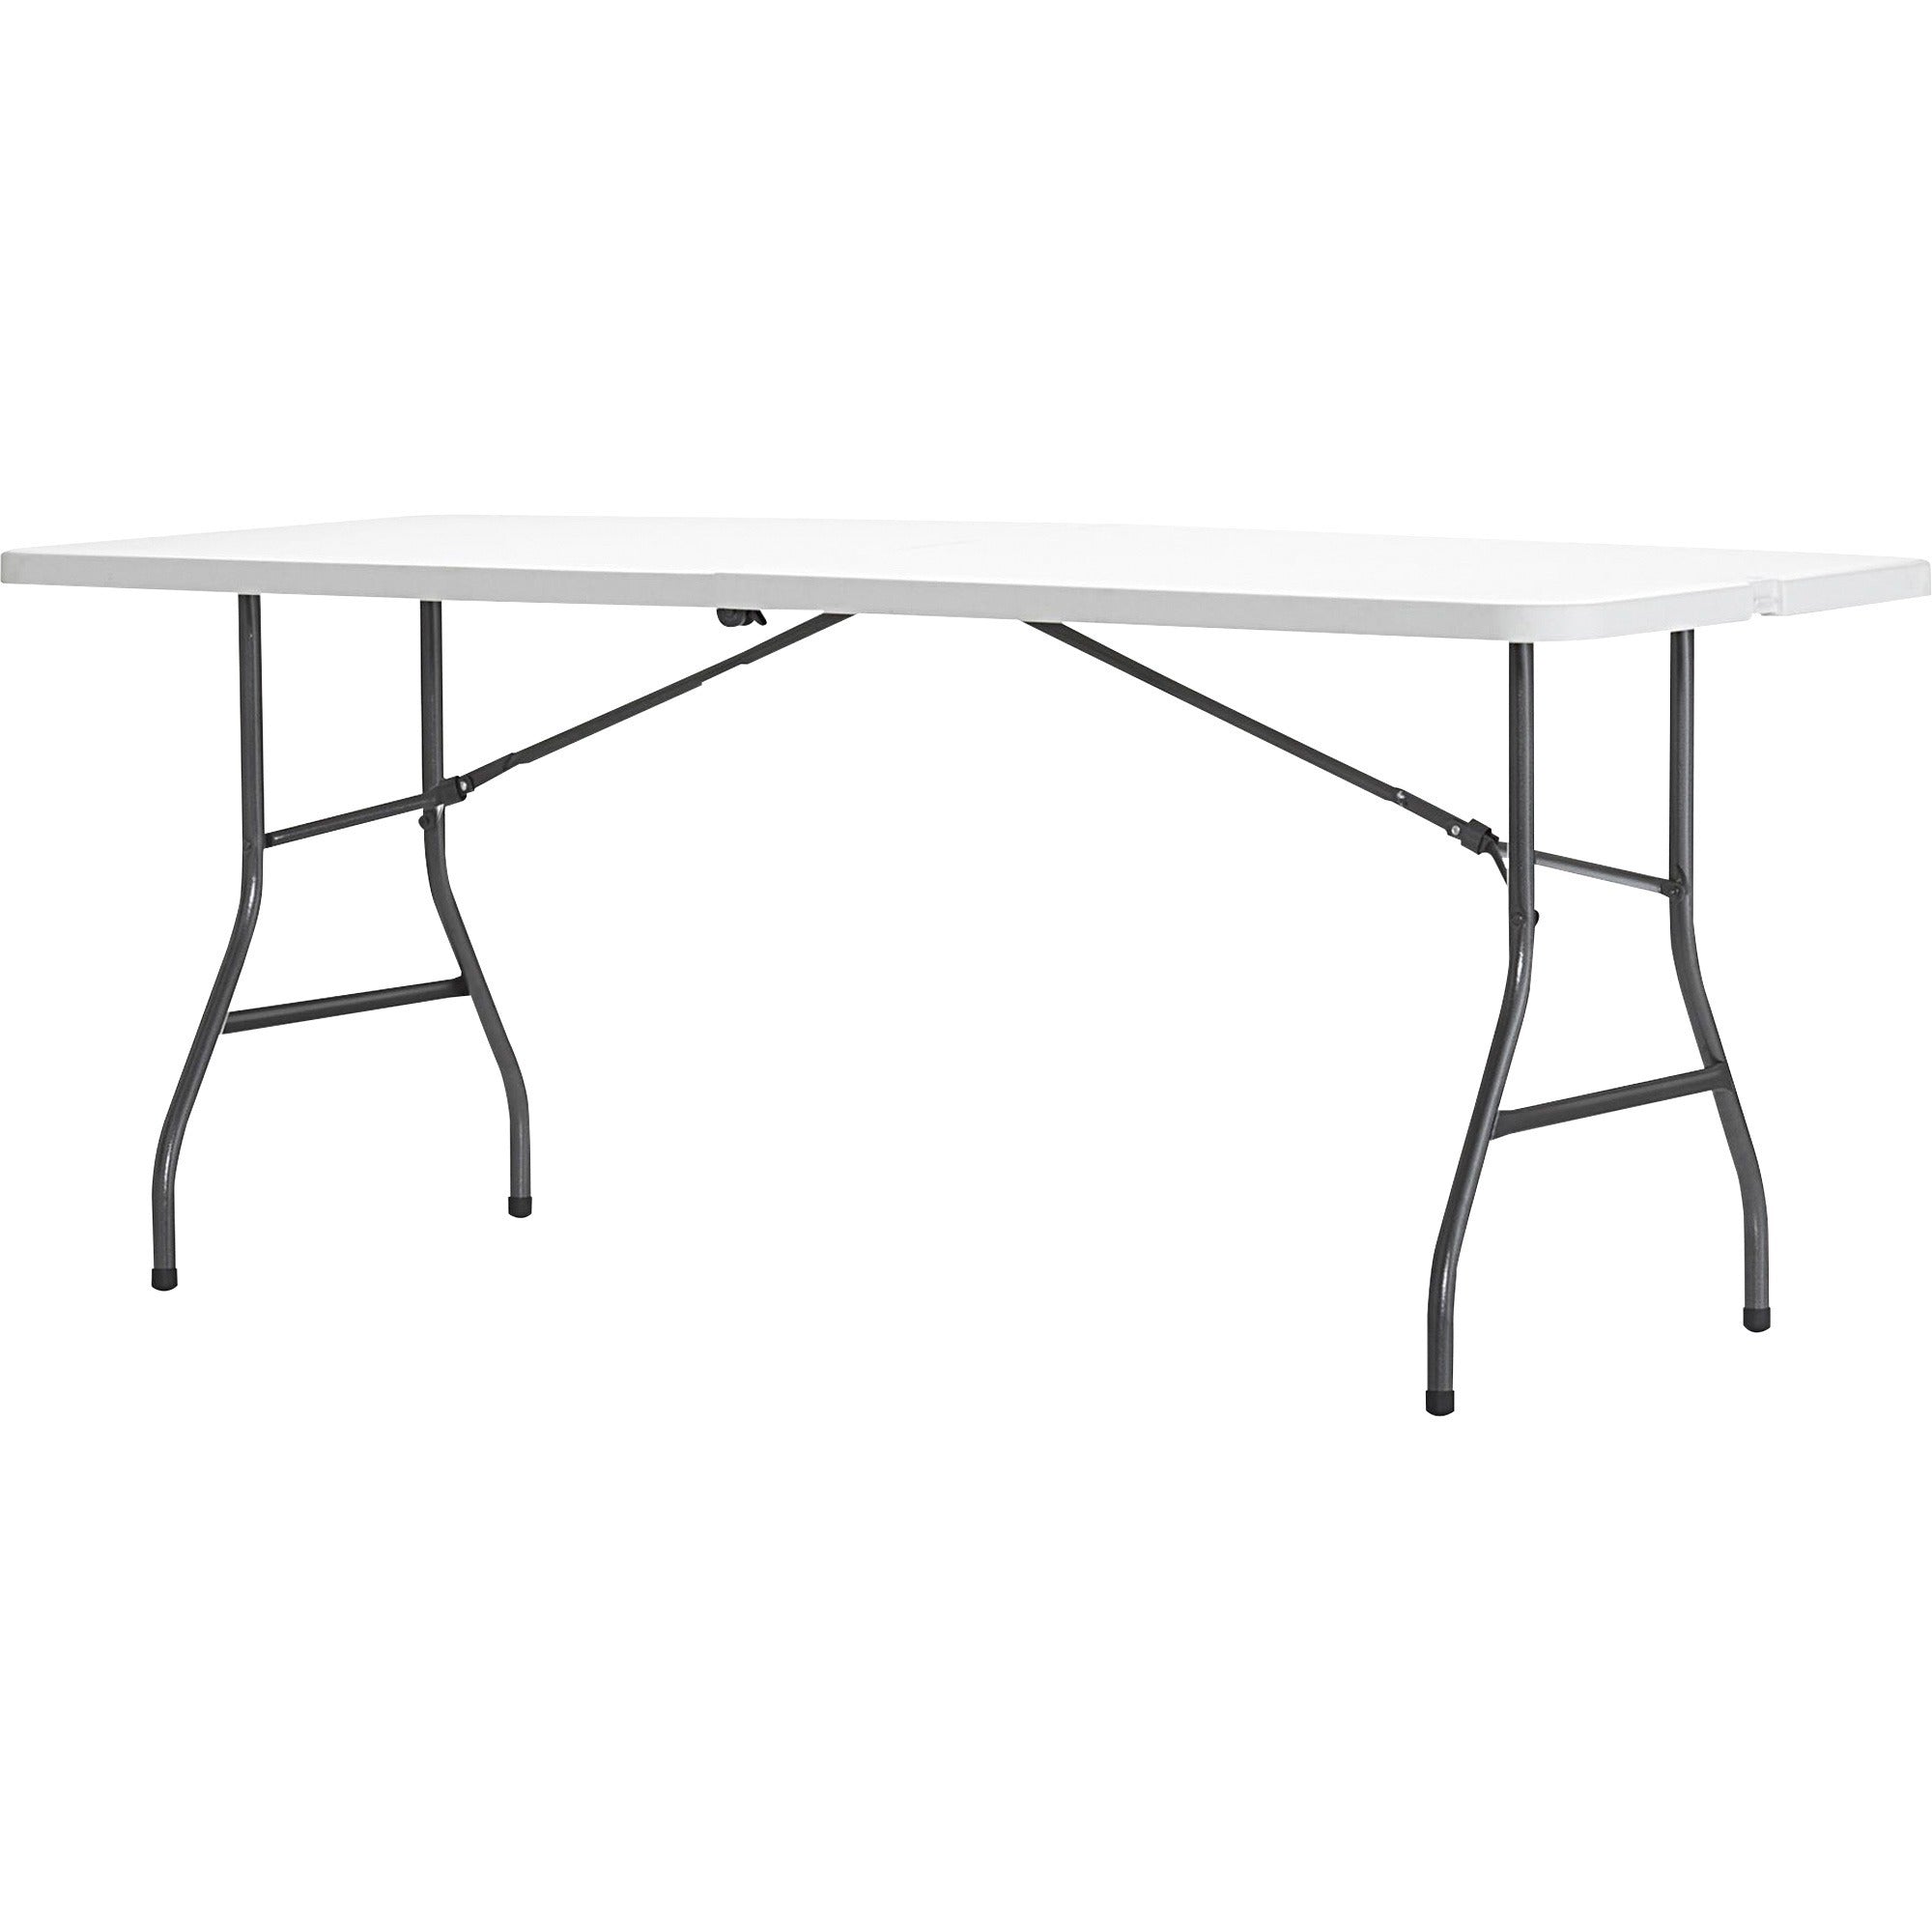 cosco-6-foot-centerfold-blow-molded-folding-table-for-table-toprectangle-top-folding-base-x-2963-table-top-width-x-72-table-top-depth-2925-height-white-1-each_csc14678wsp1 - 3